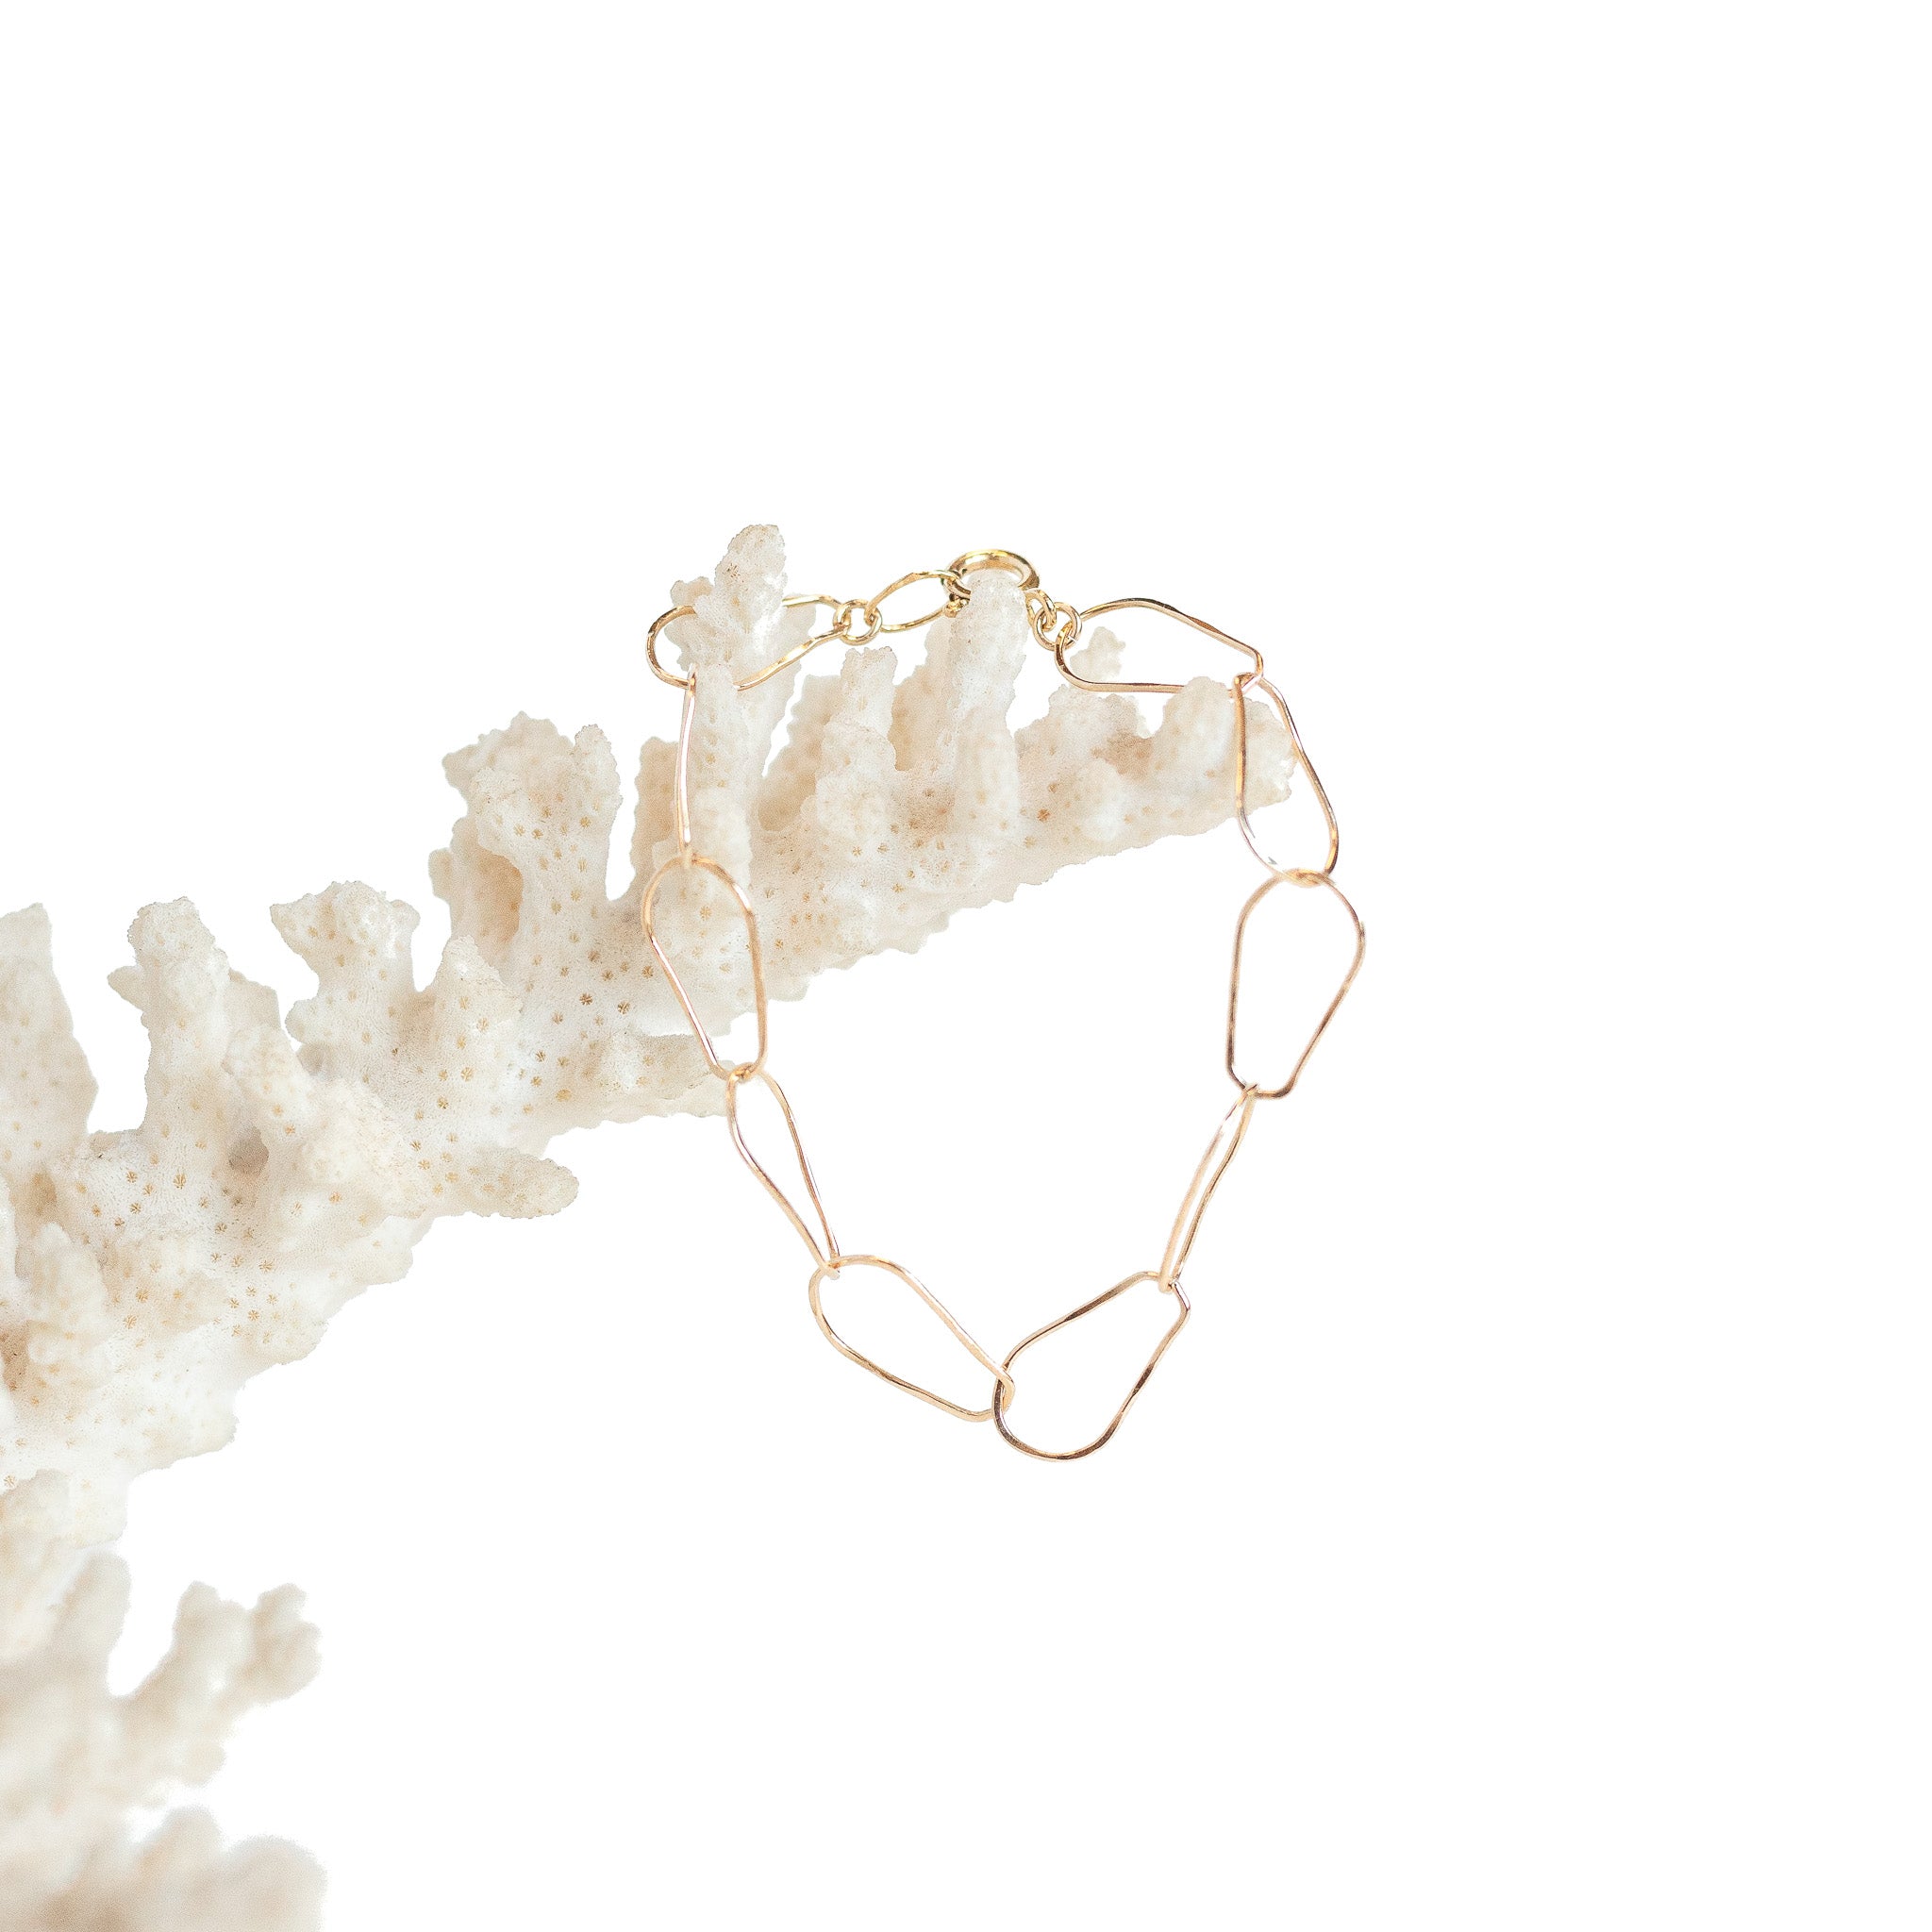 Gold filled pear chain bracelet. Shown on a piece of coral. 